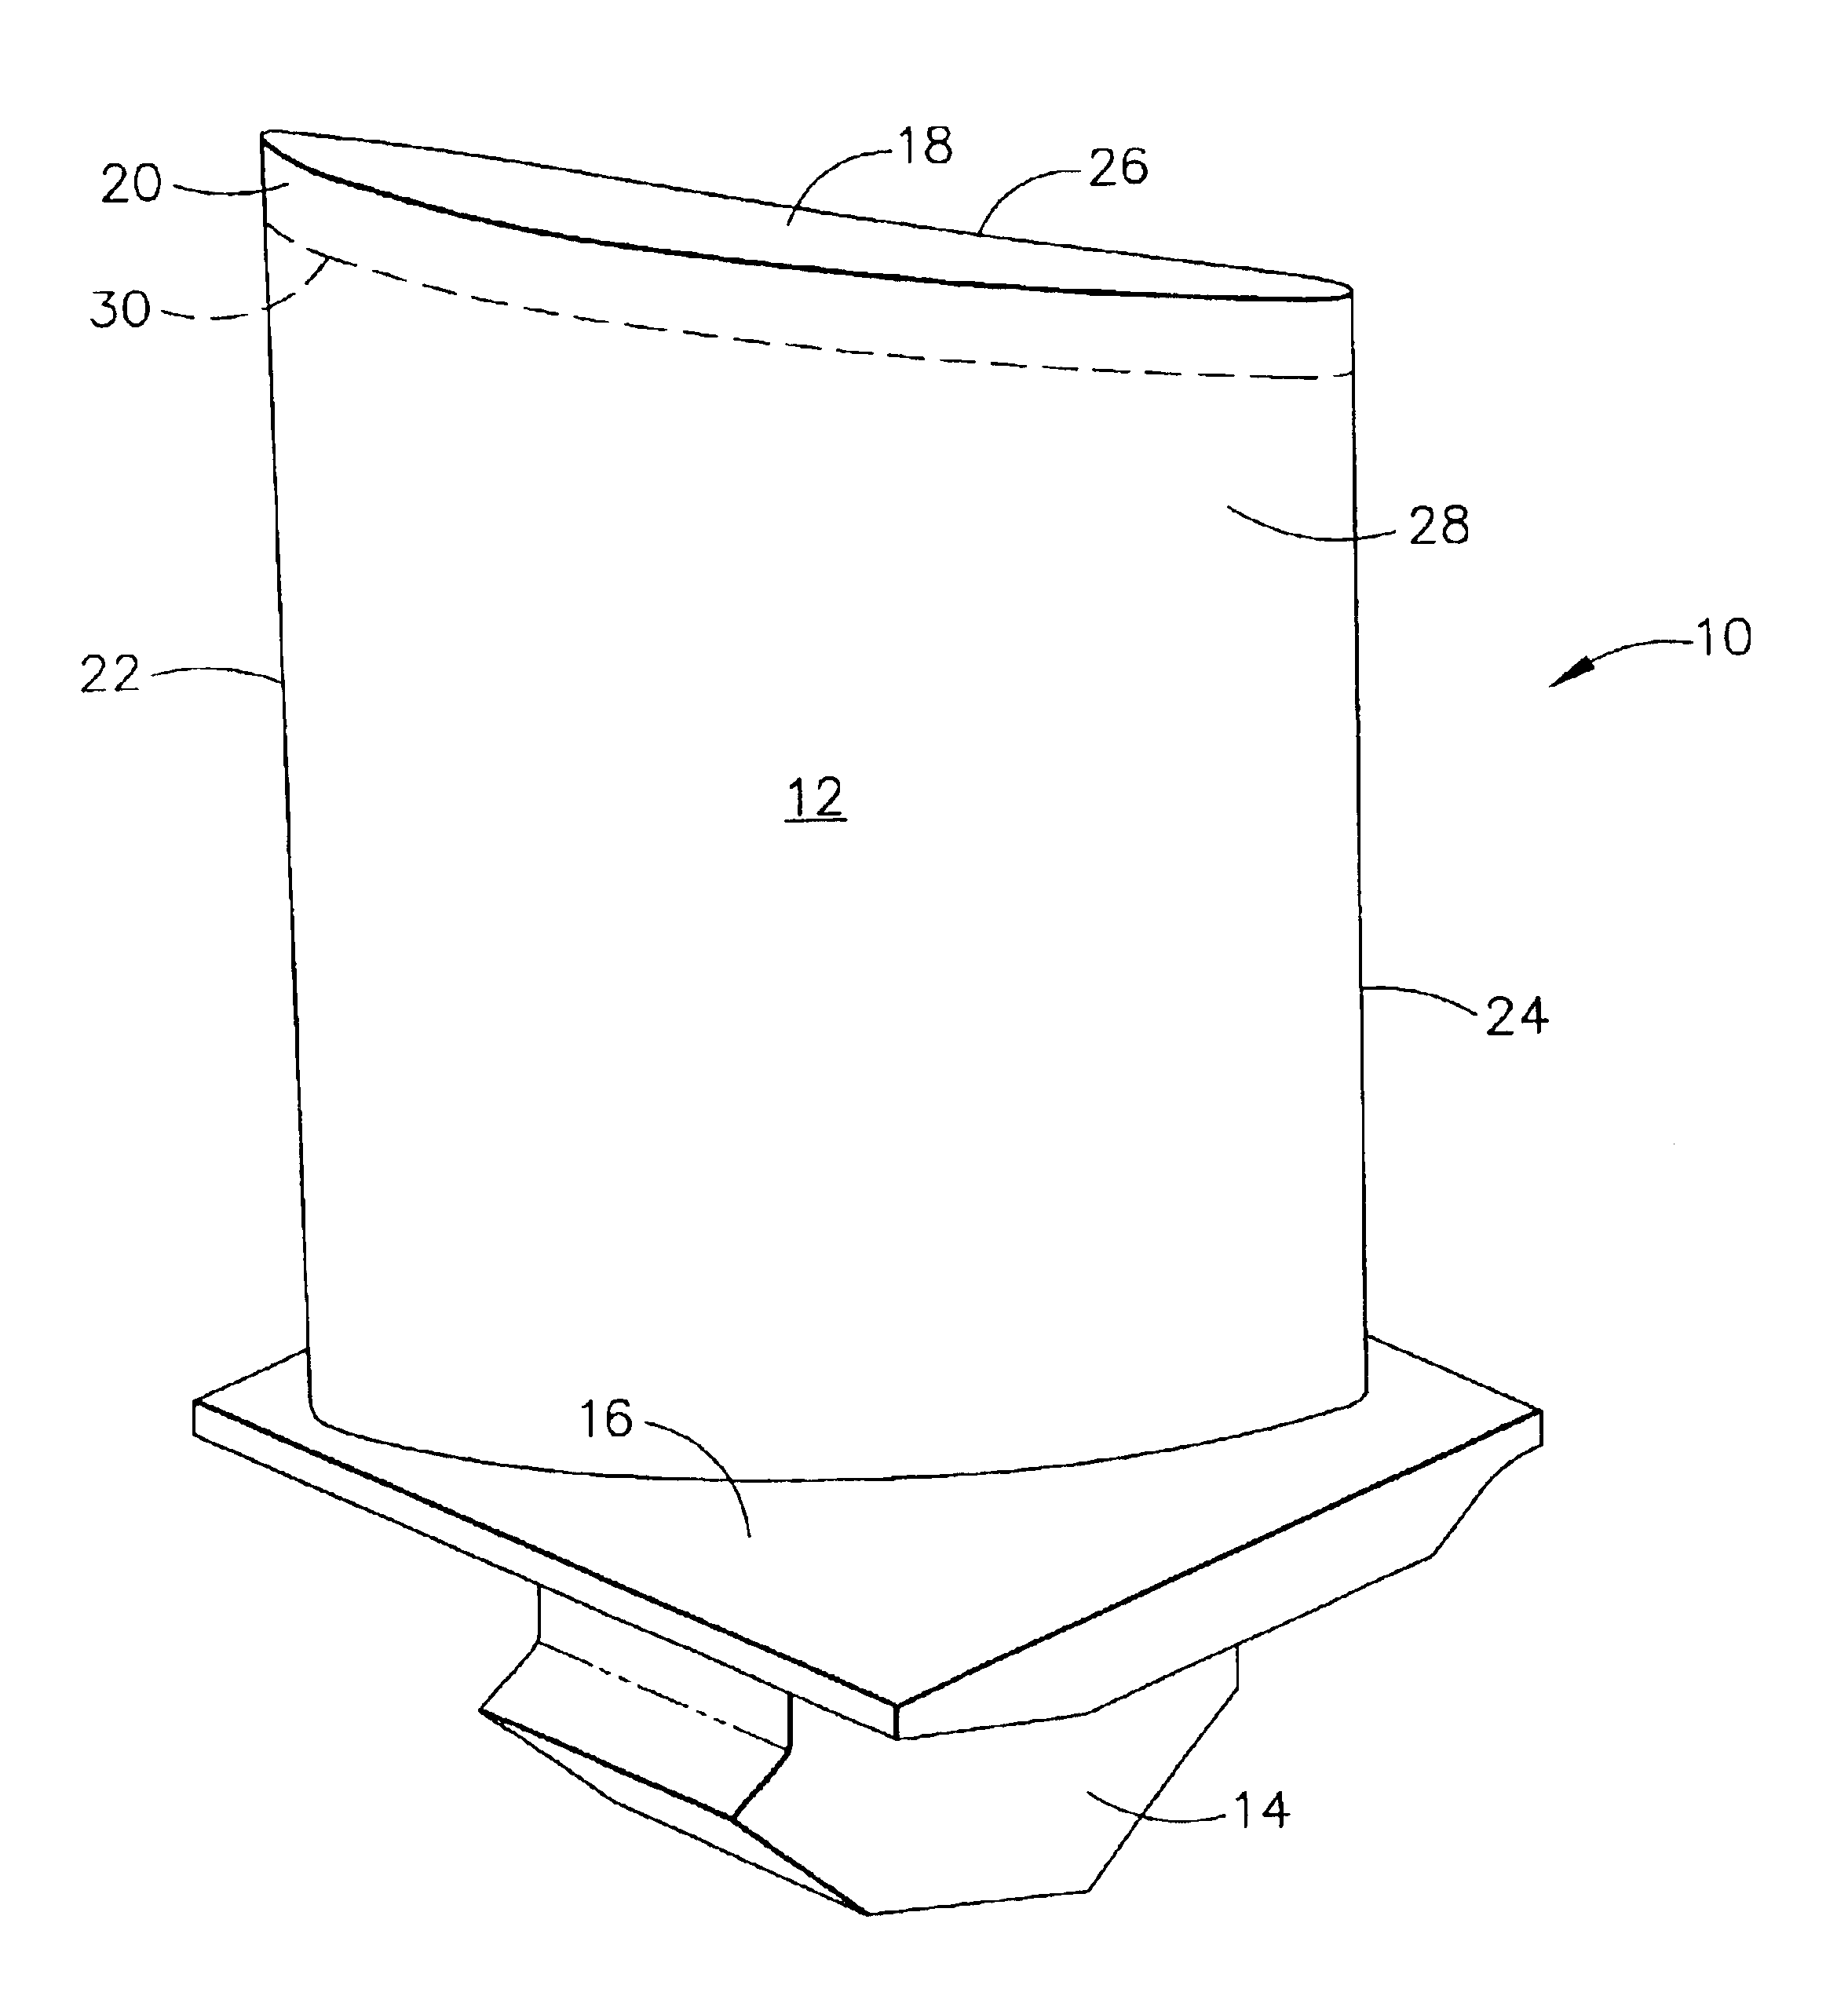 Metallic article with integral end band under compression